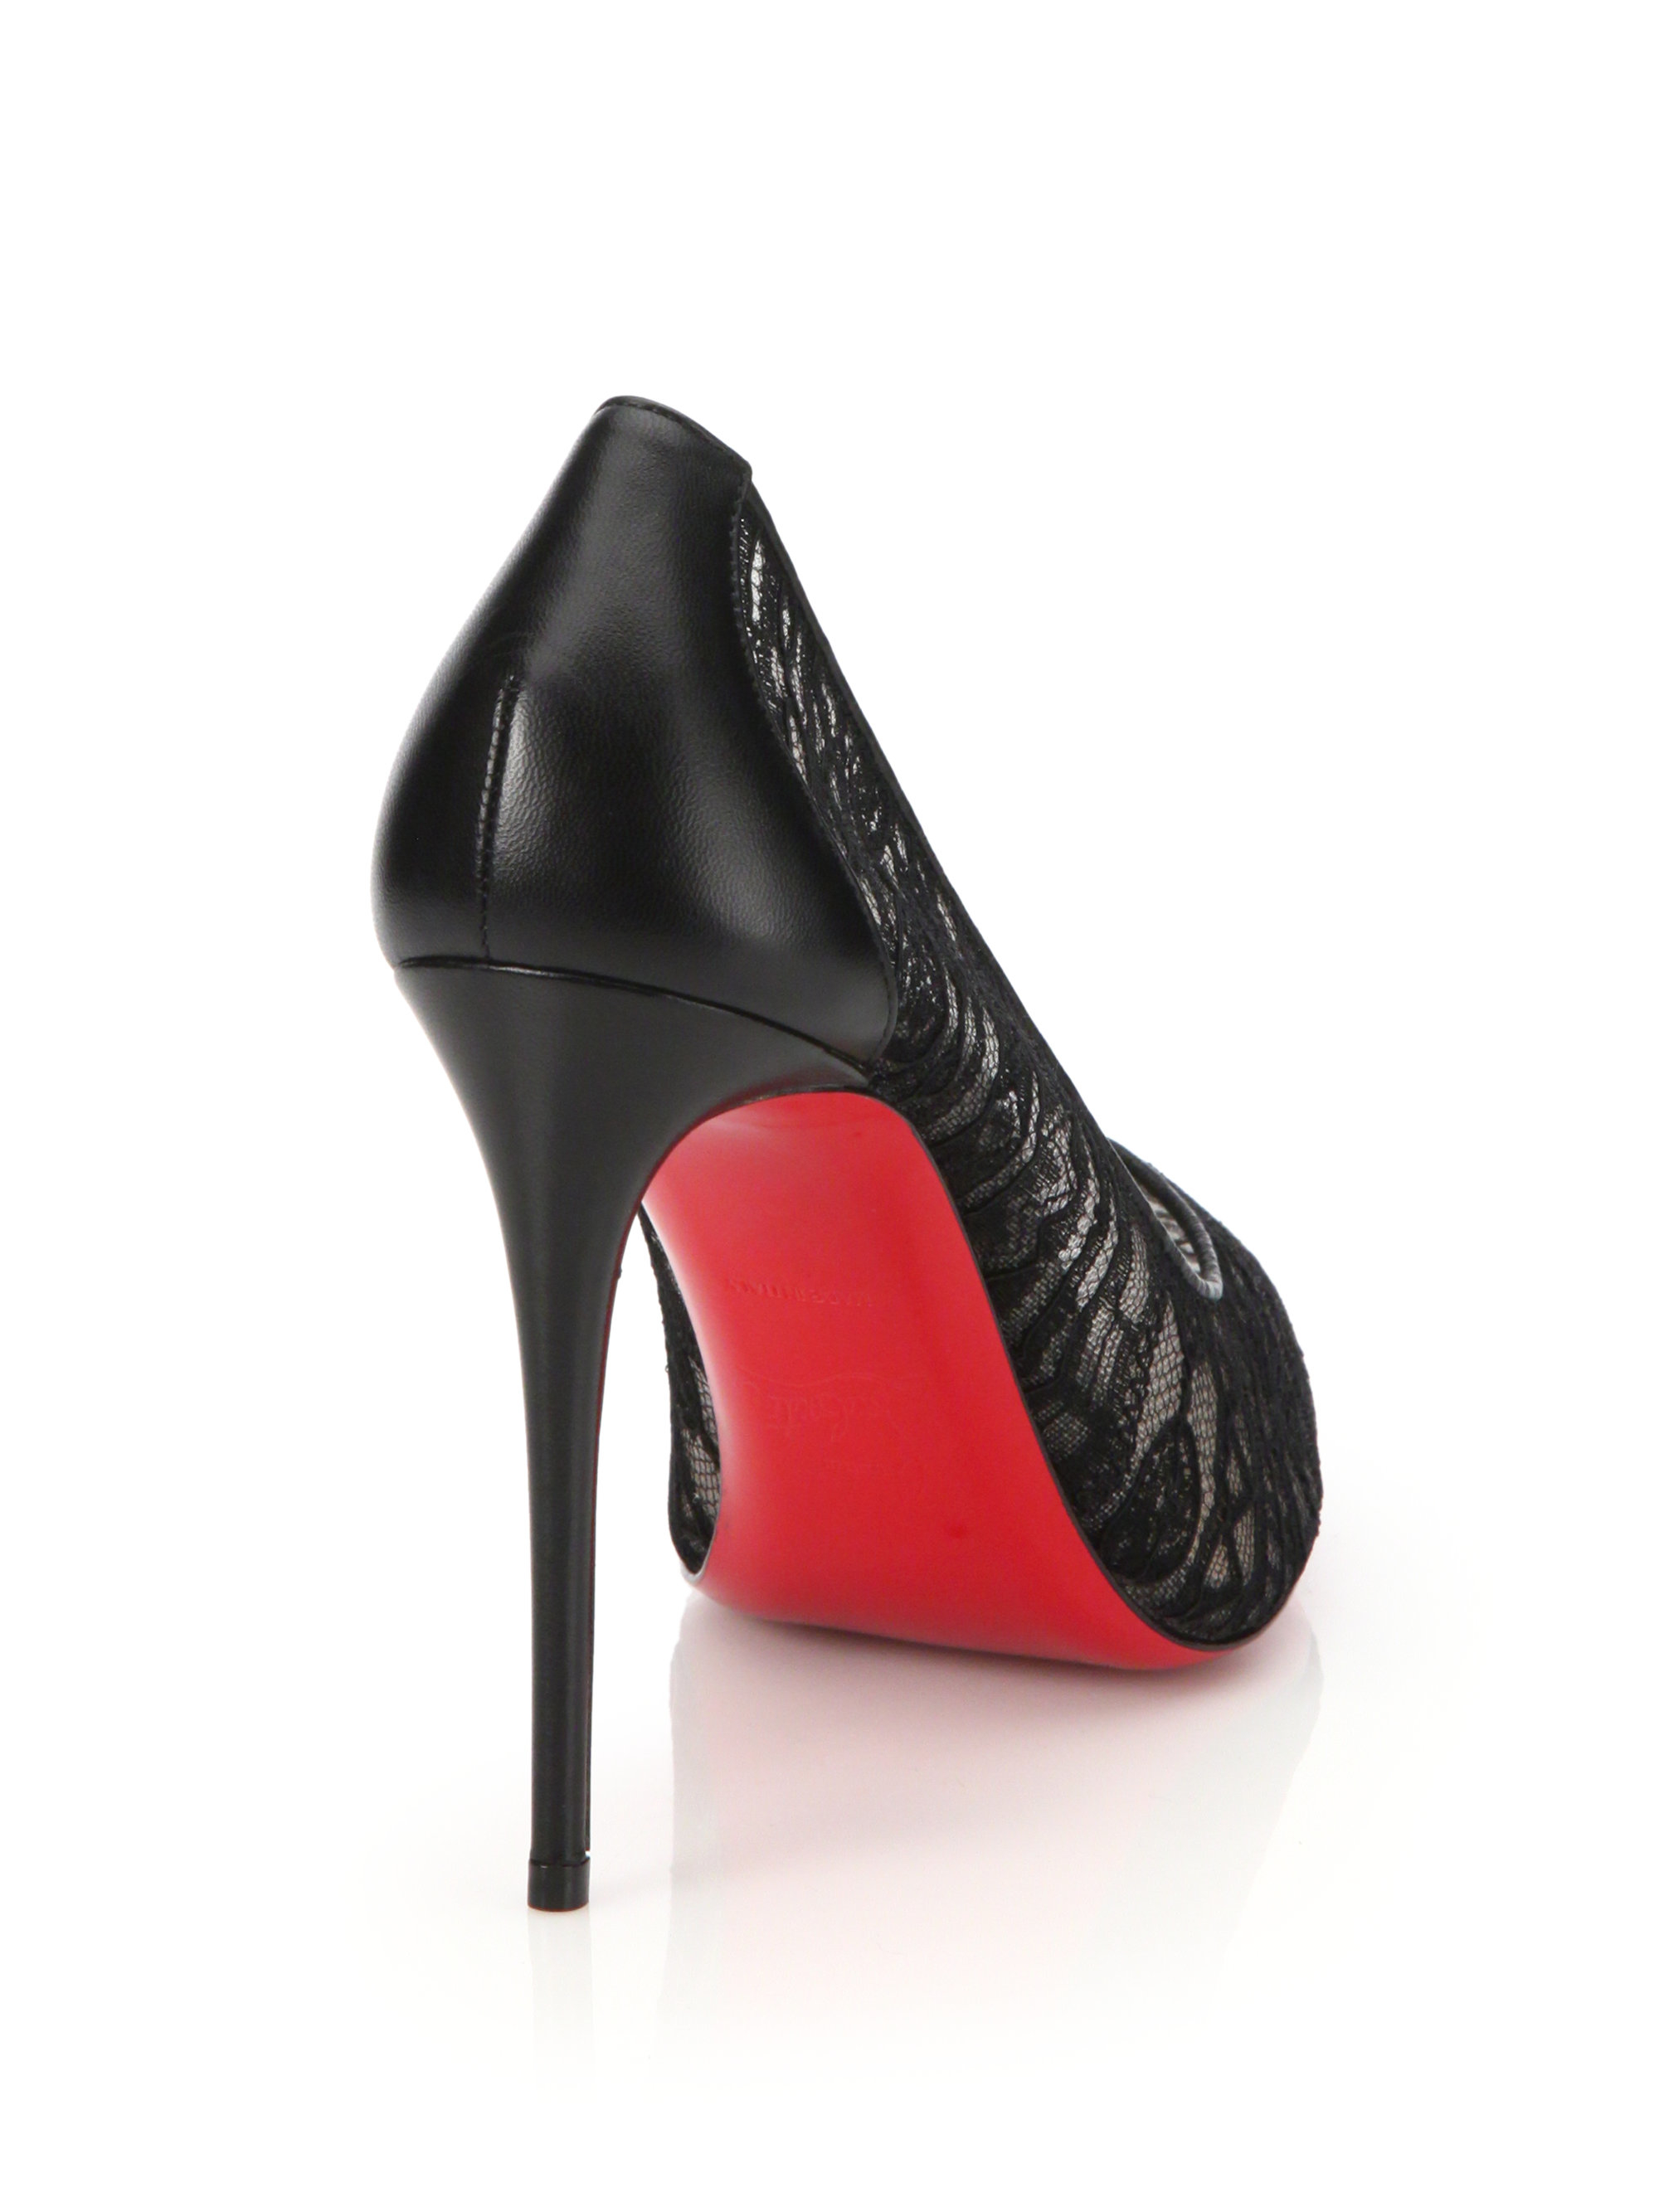 Christian louboutin Dorissima Lace and Leather Pumps in Black | Lyst